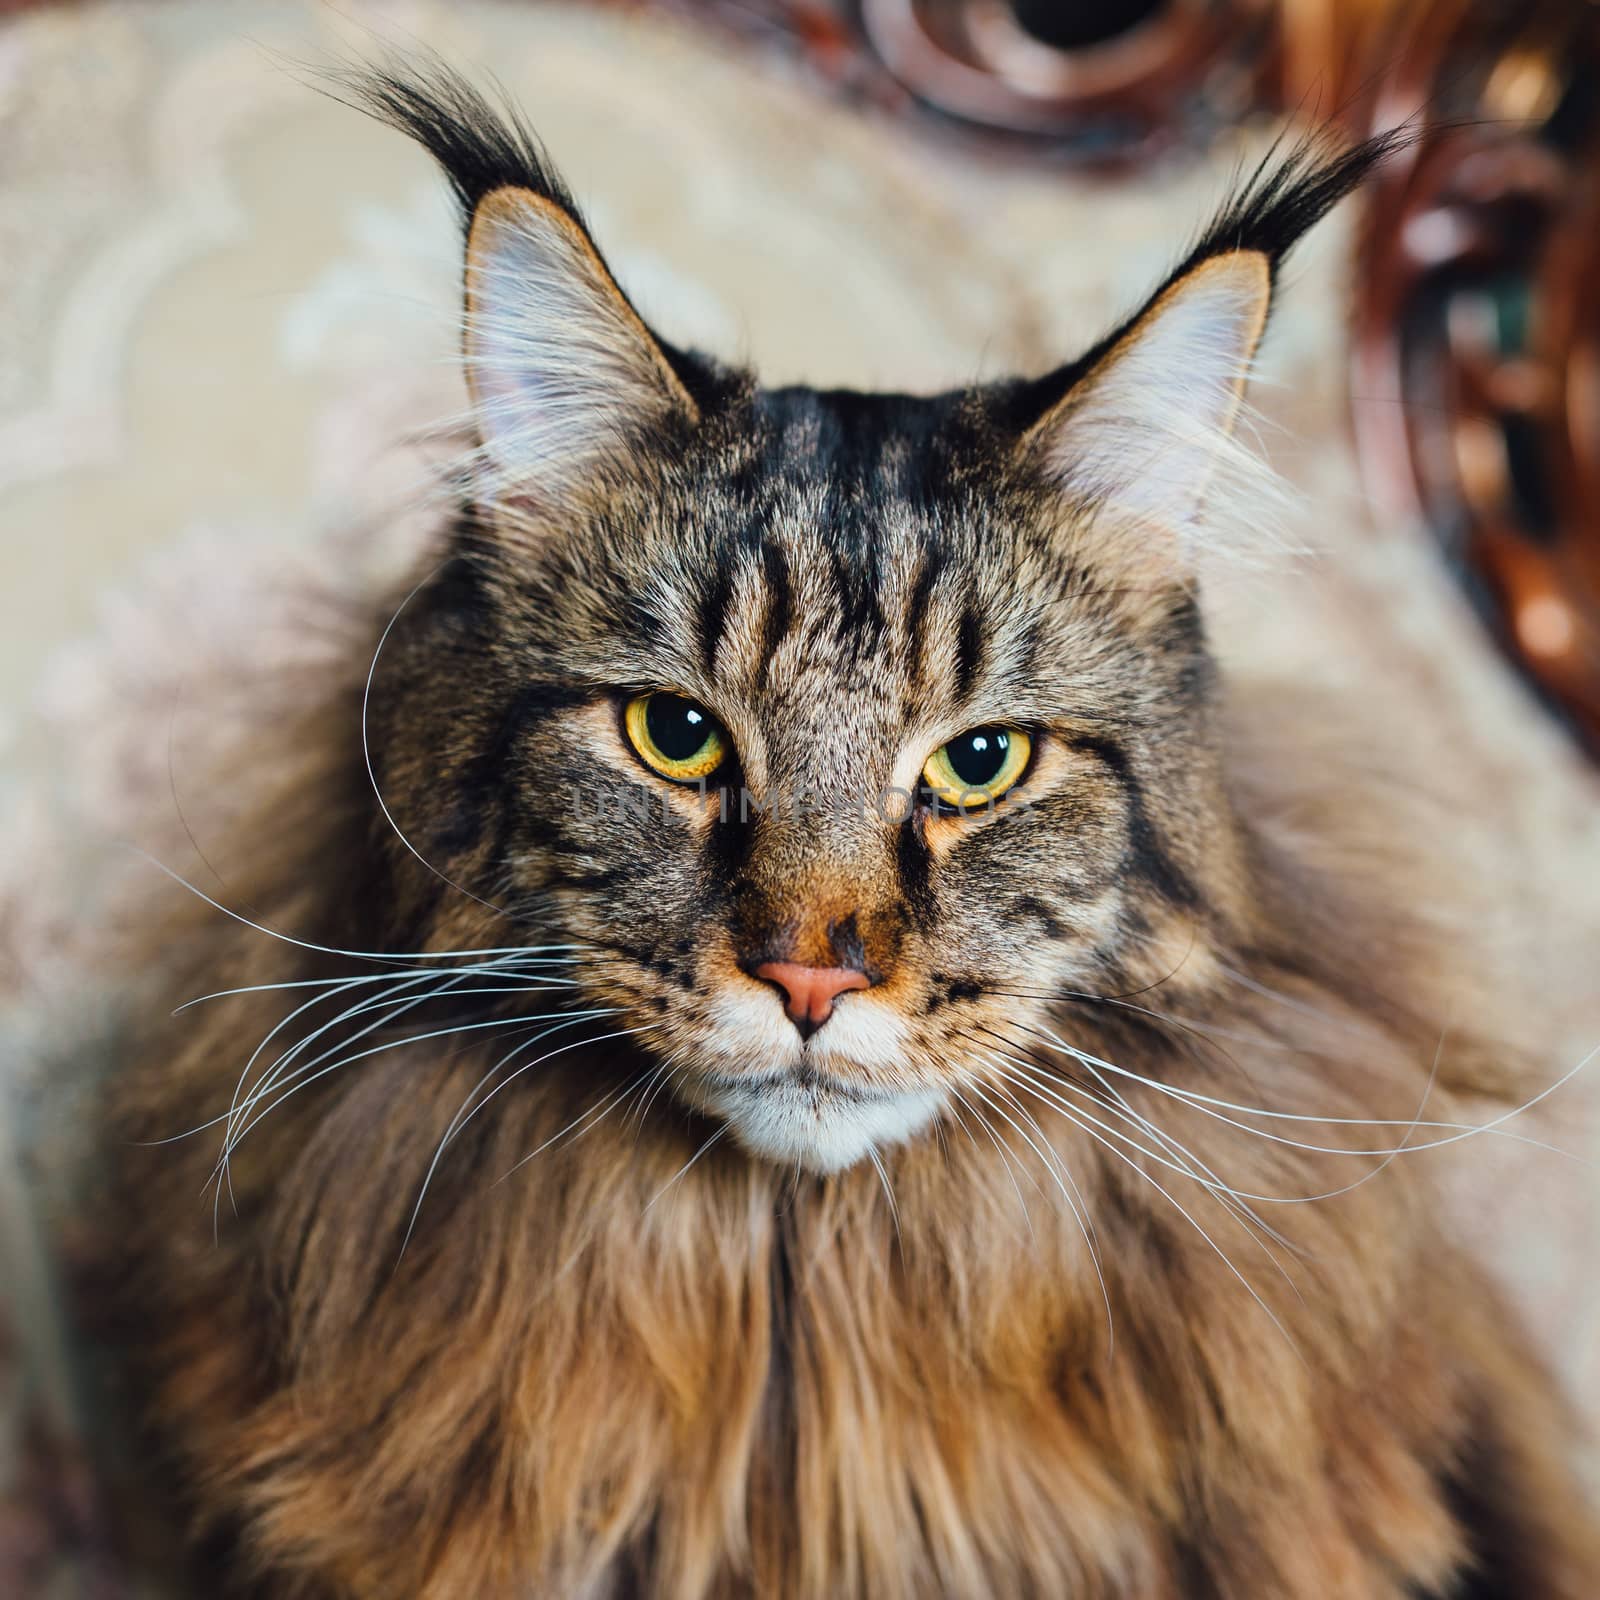 Maine Coon cat, close-up view